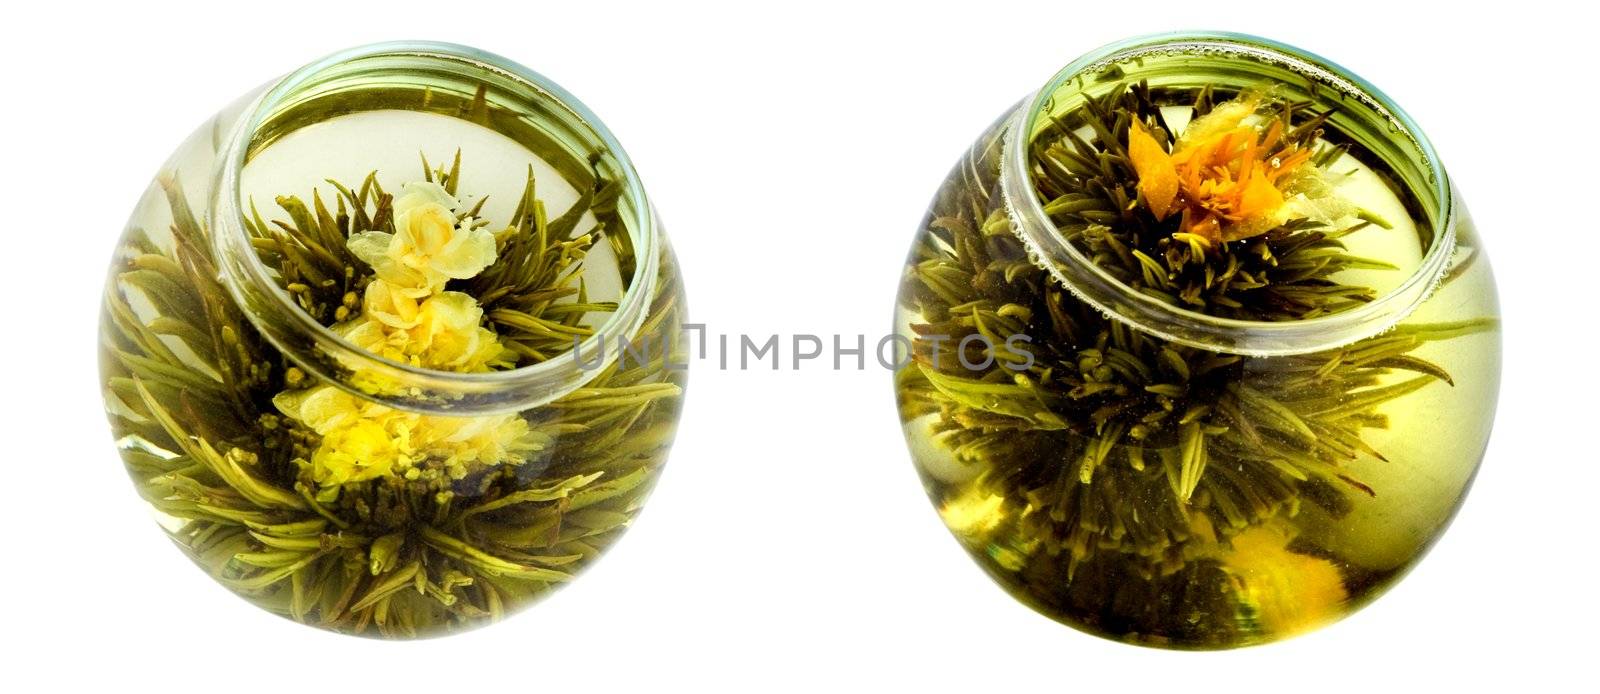 Special for spa and restaurants. Green tea with a beautiful chrysanthemum flower. Isolated on white